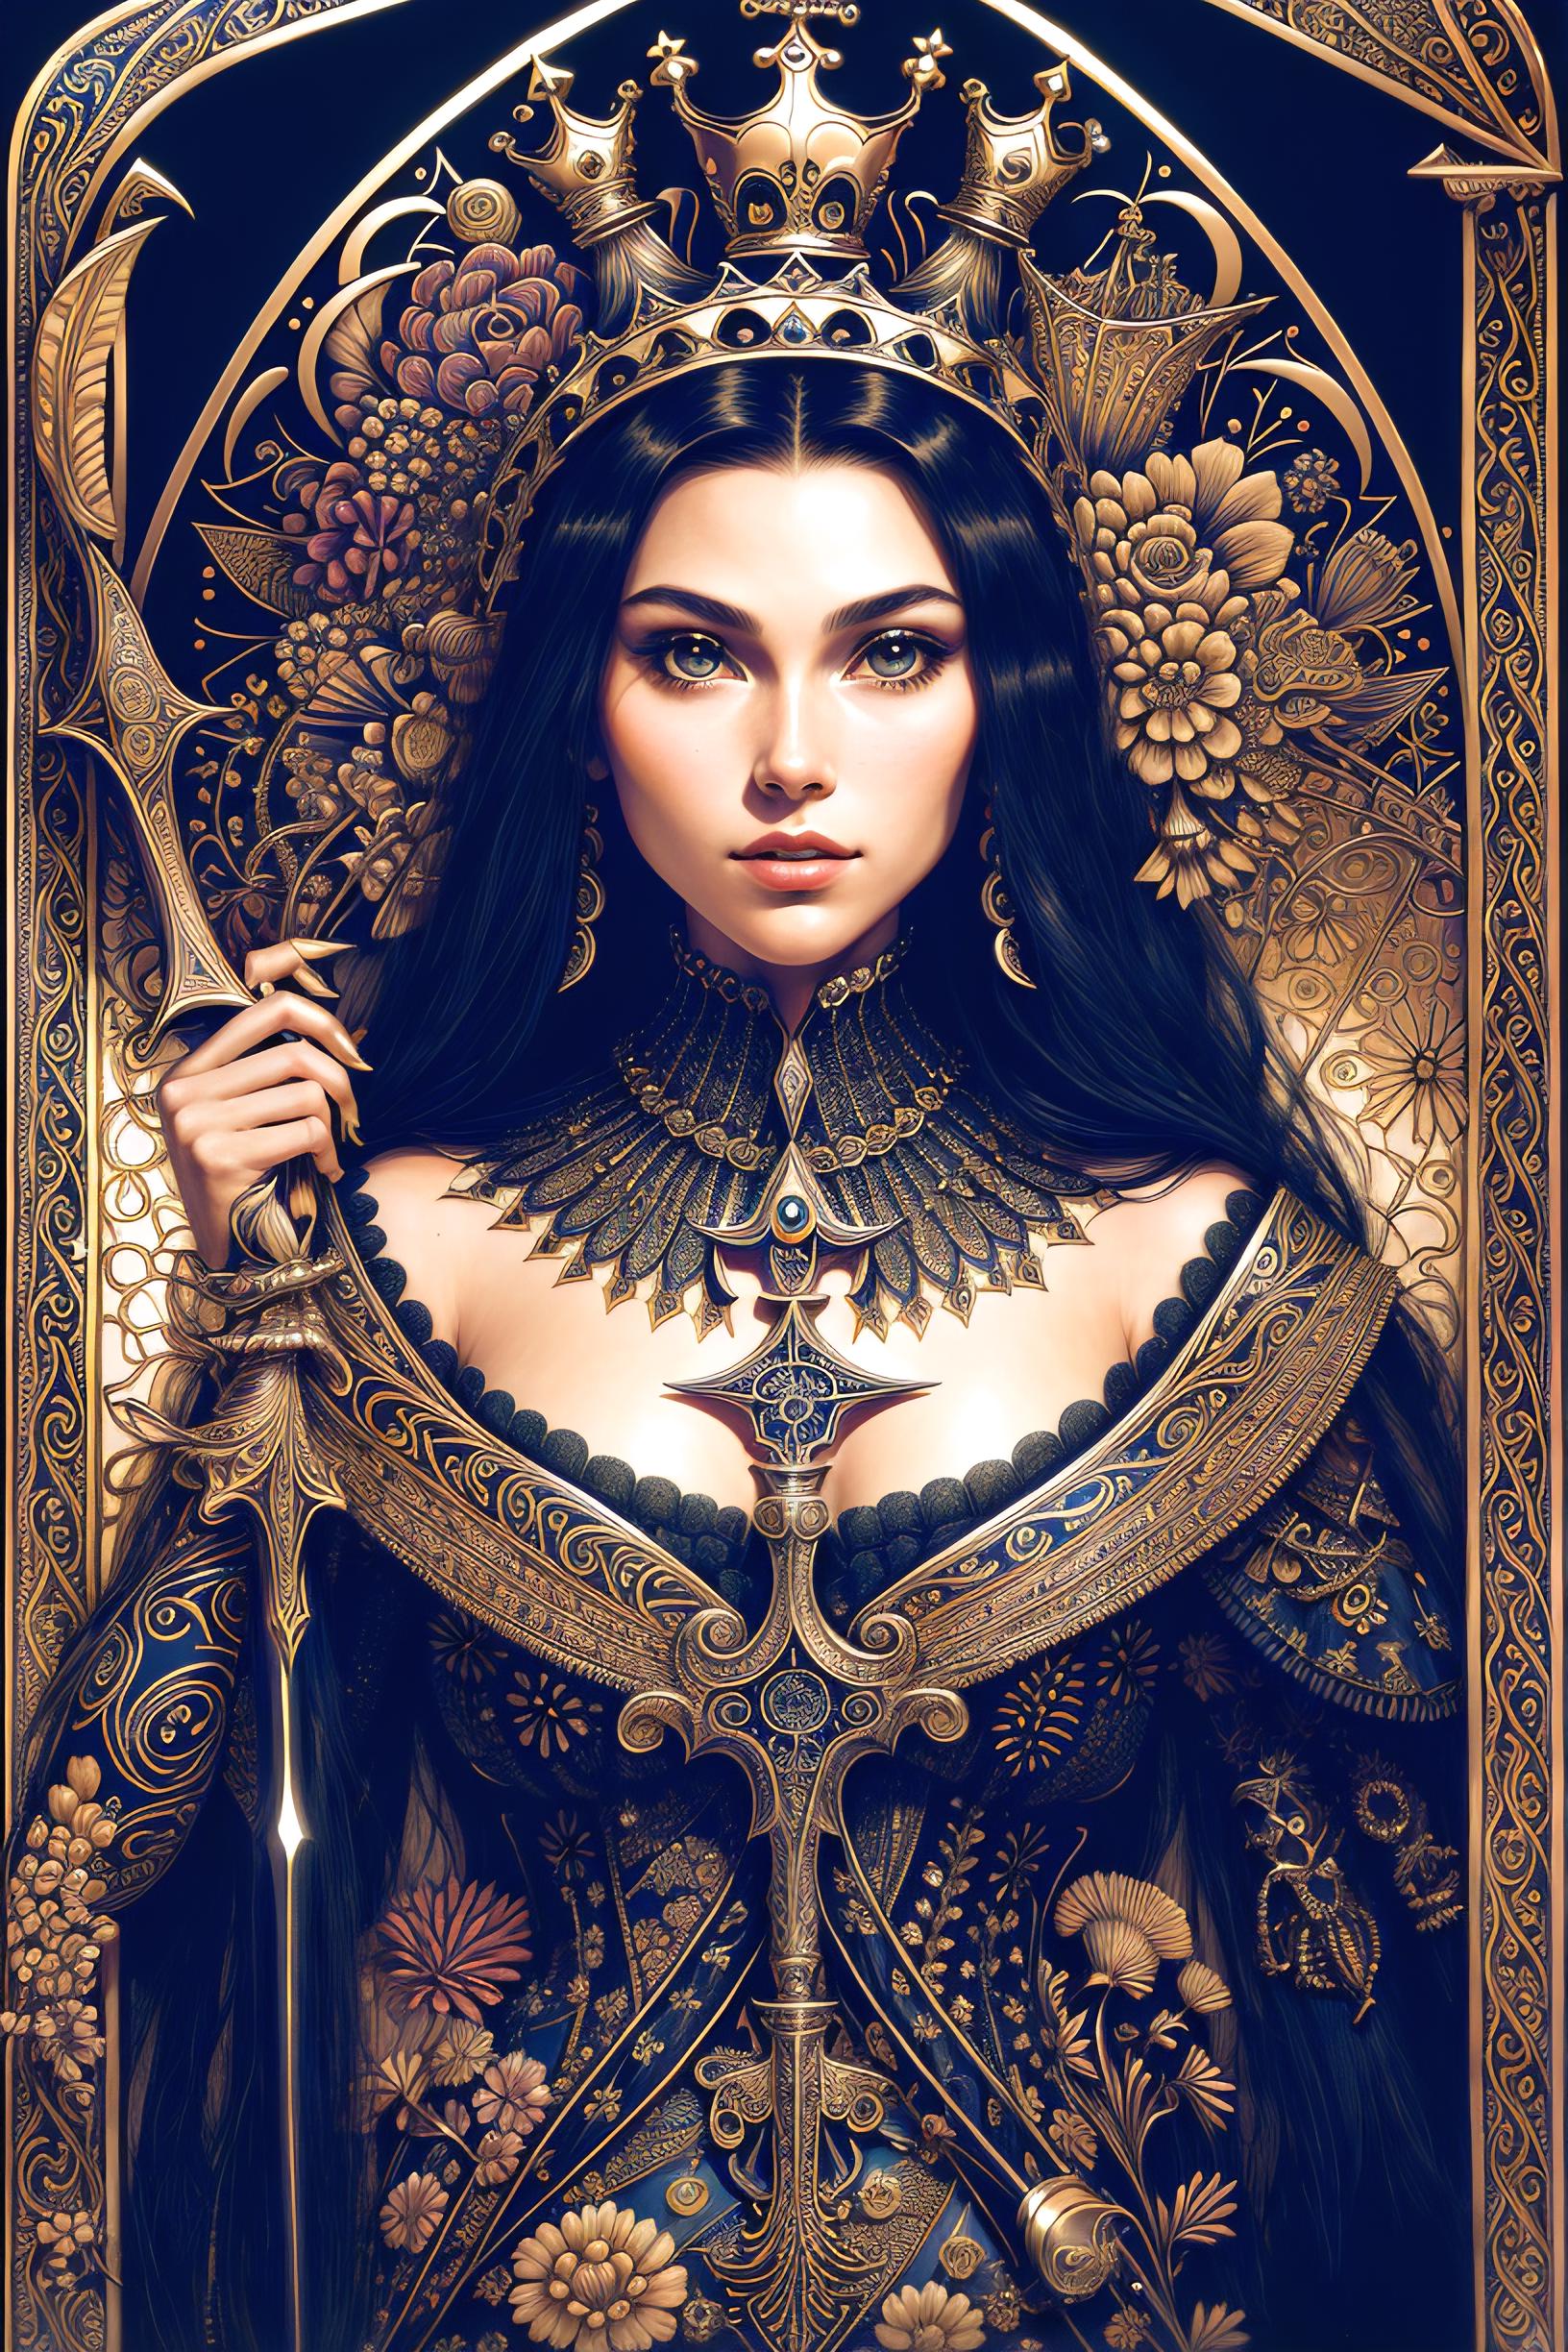 Artistic Illustration of a Woman Holding a Sword with Gold and Blue Tones